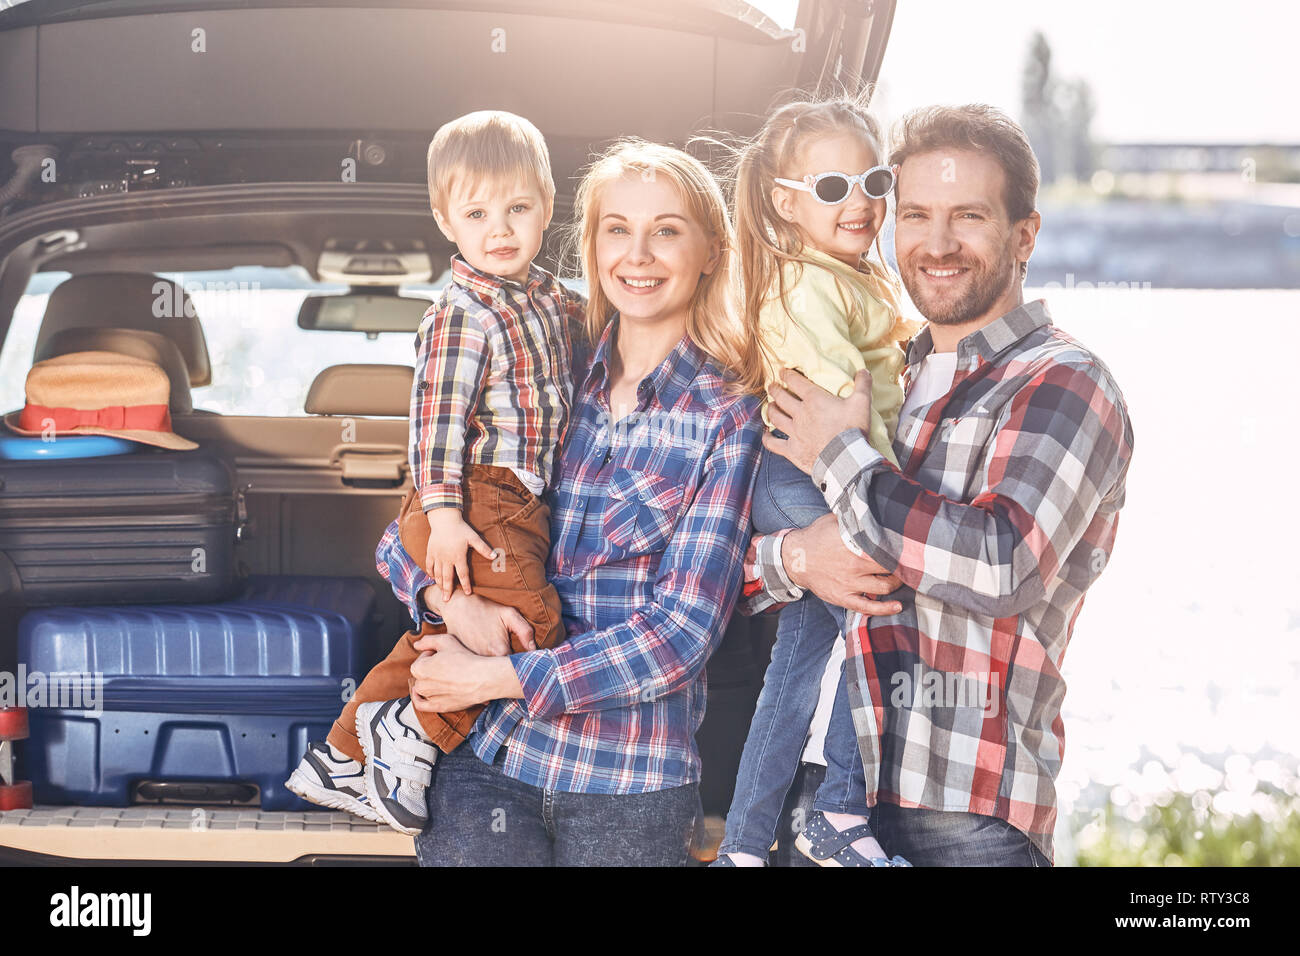 Mother, father, girl and boy loaded bags in the trunk of car. Parents stand near the car, holding their kids, they are ready to travel. Stock Photo